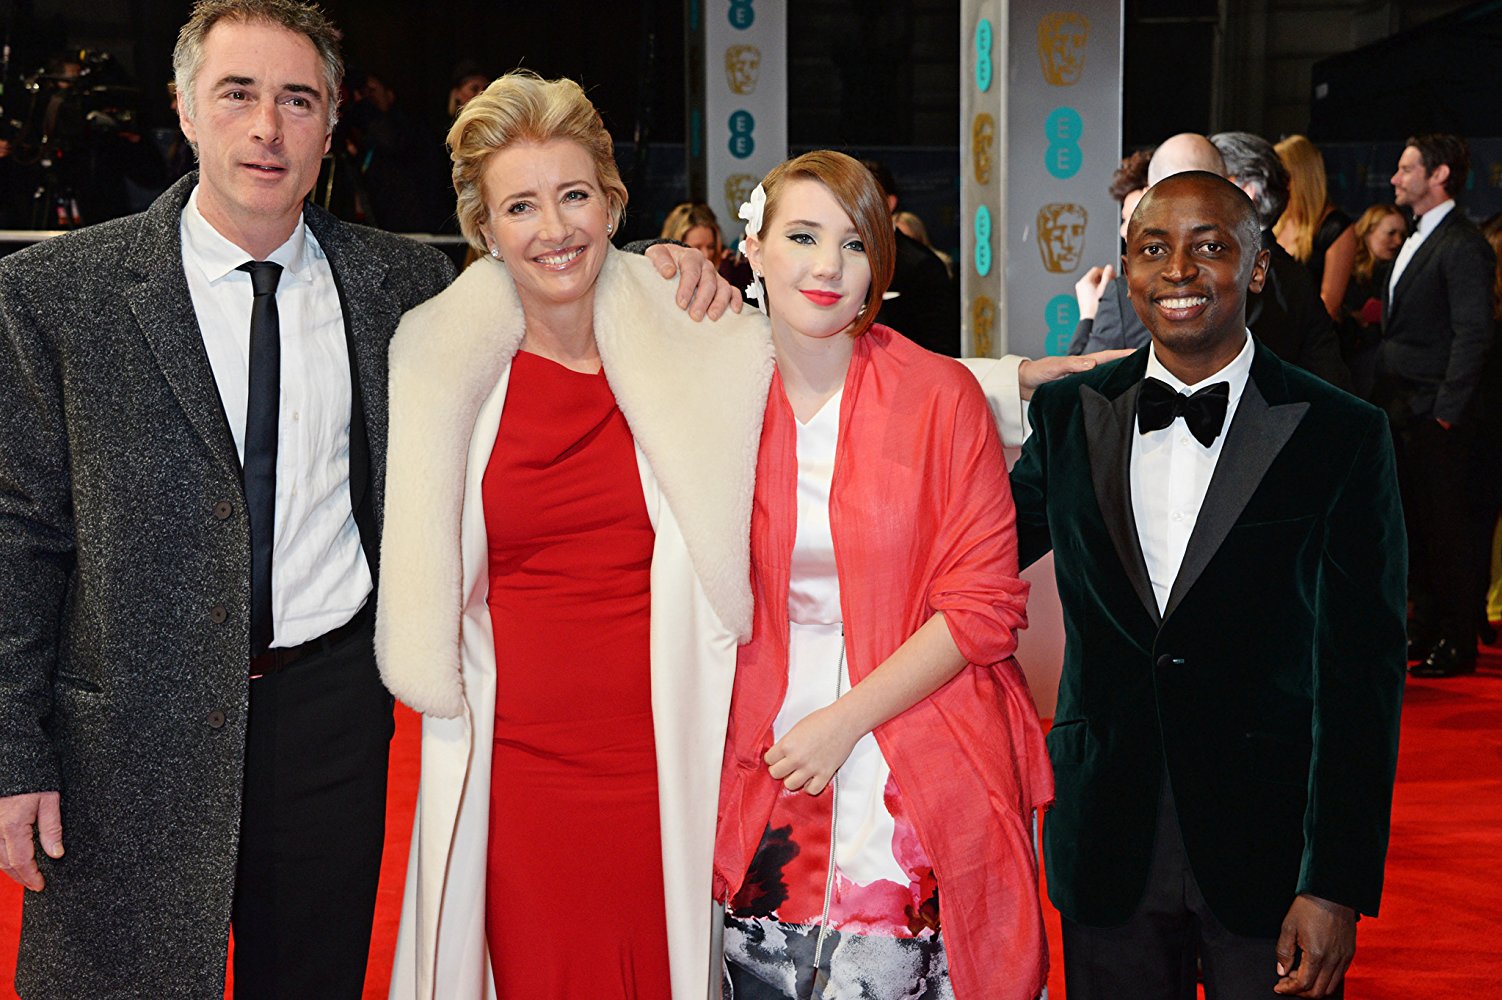 Emma Thompson gifted Greg Wise condoms to combat Strictly curse!